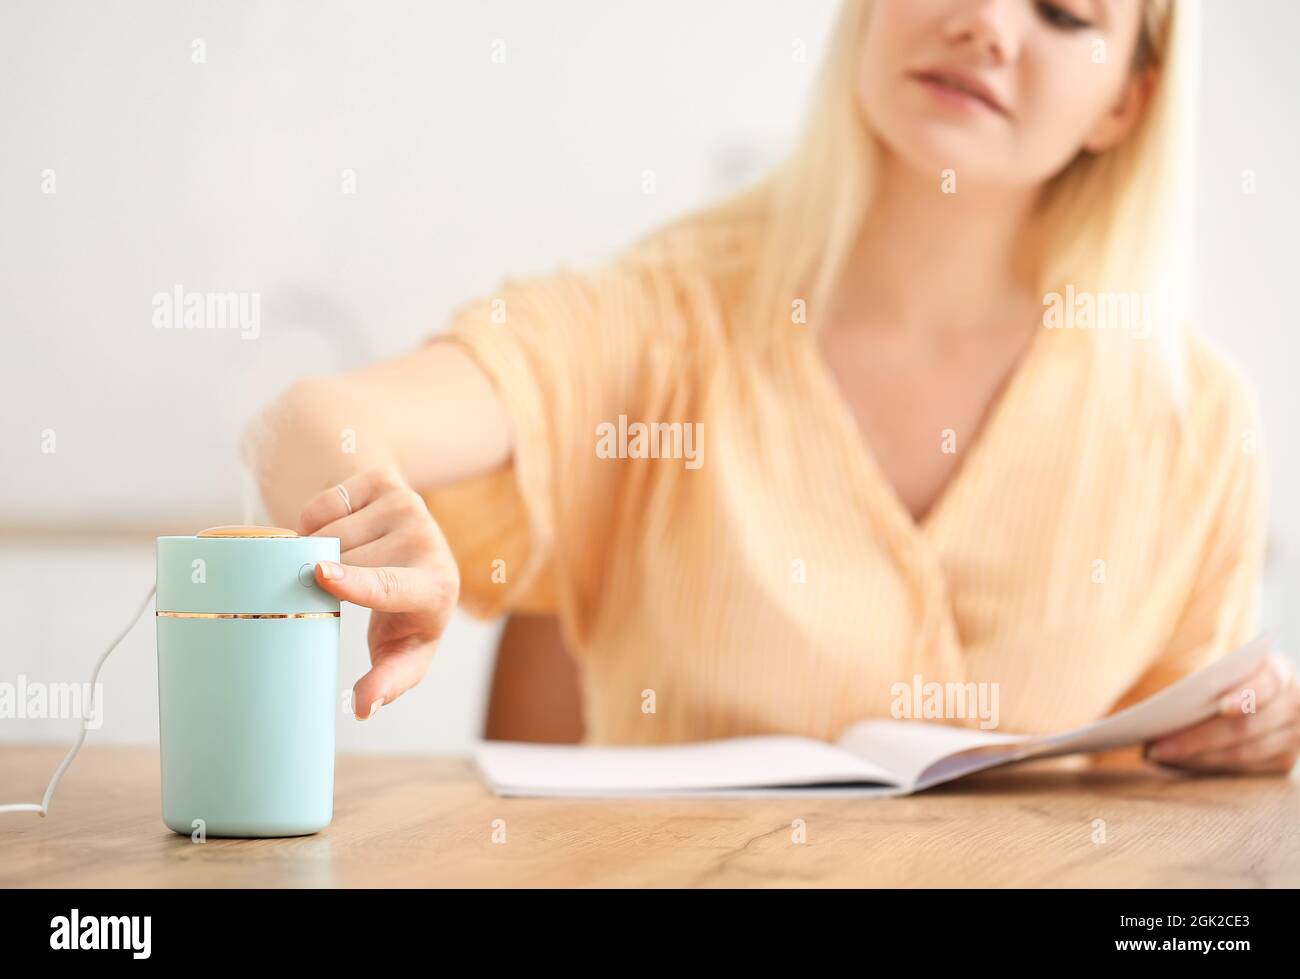 https://c8.alamy.com/comp/2GK2CE3/woman-with-modern-humidifier-sitting-at-table-in-kitchen-2GK2CE3.jpg